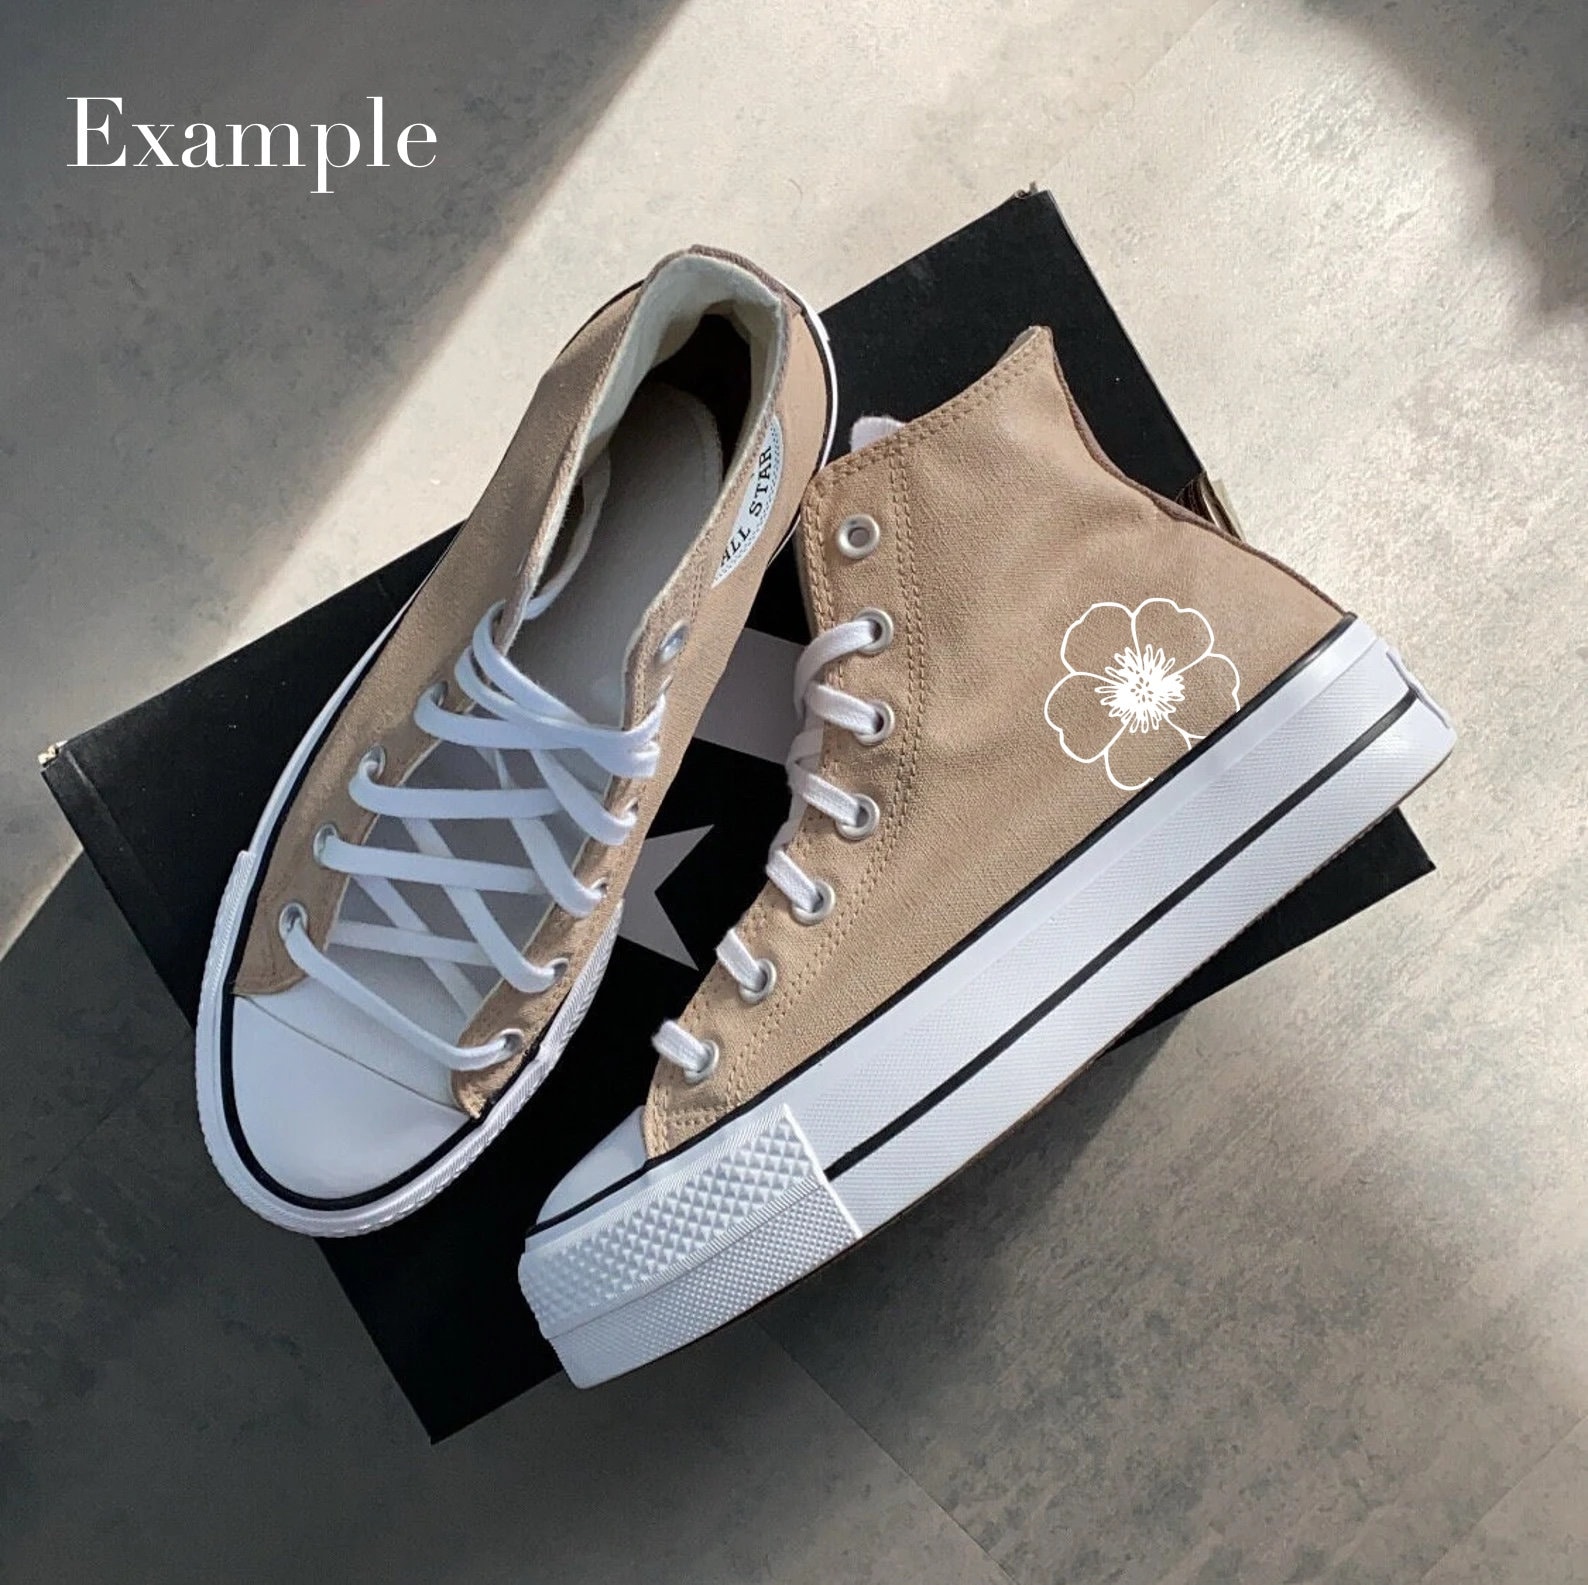 Brown Converse All Star Platform with Motive custom Design - Etsy Norway